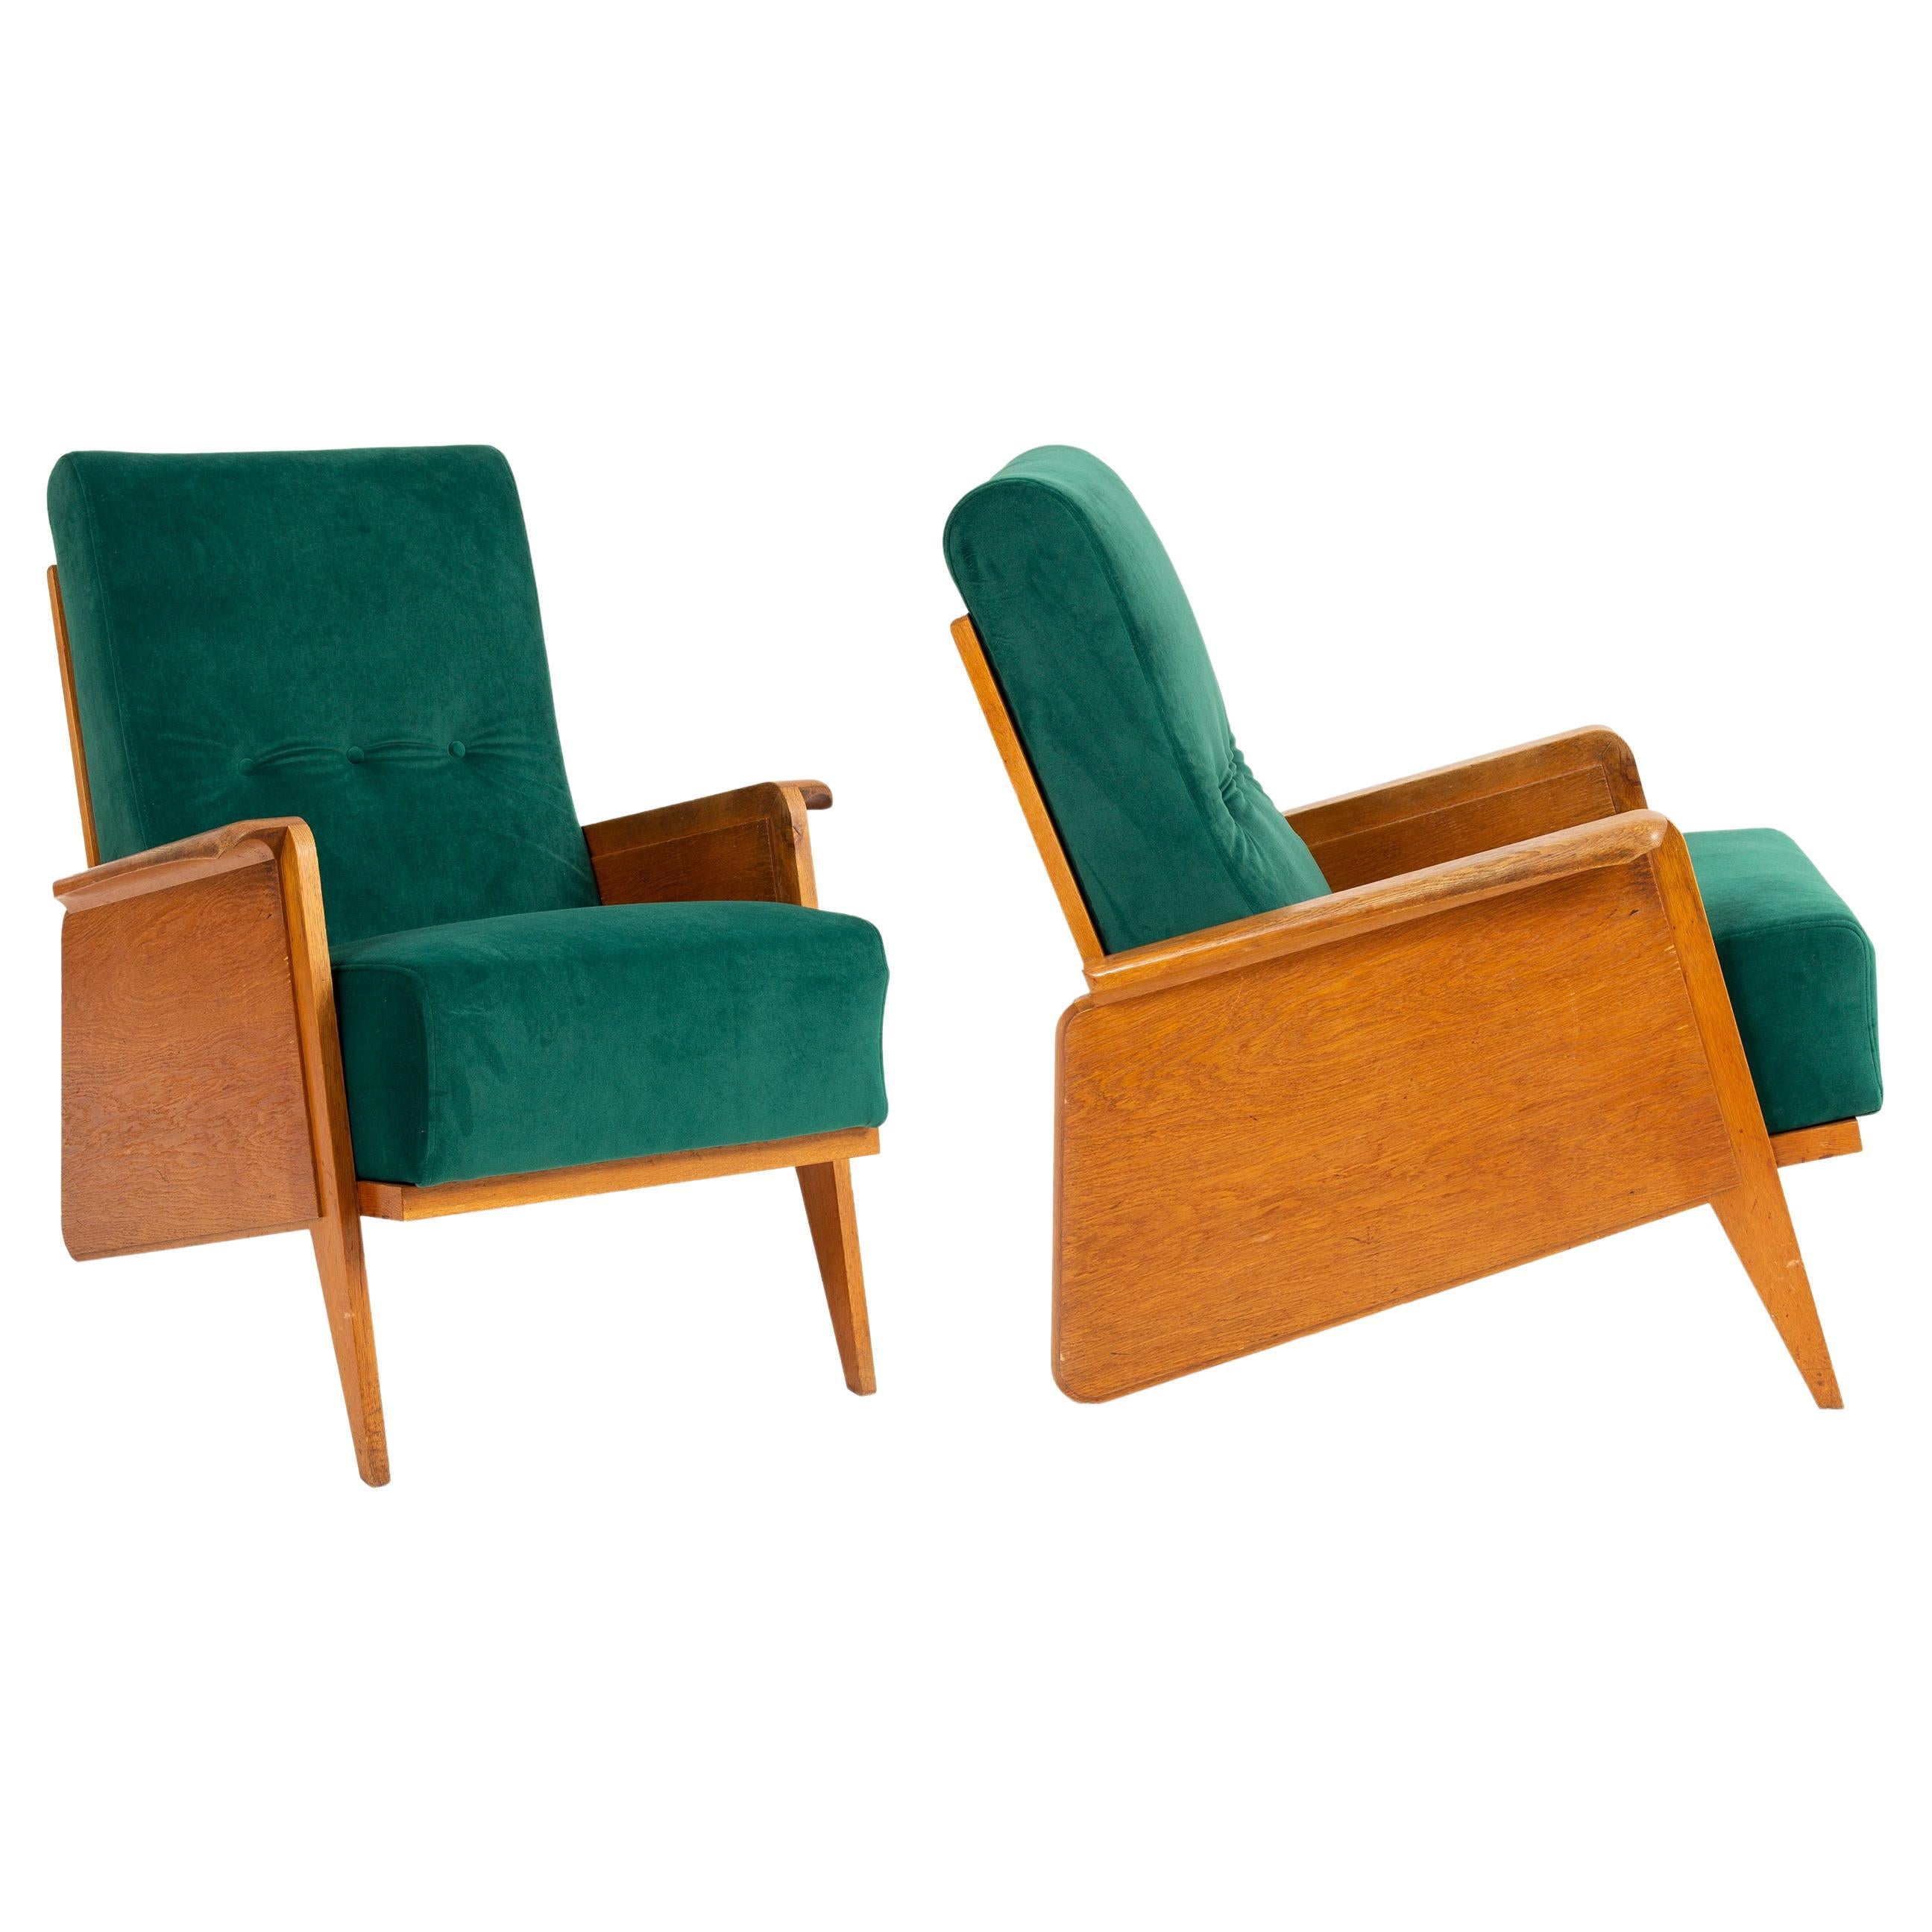 Armchair pair from the 1930s. Rare piece.